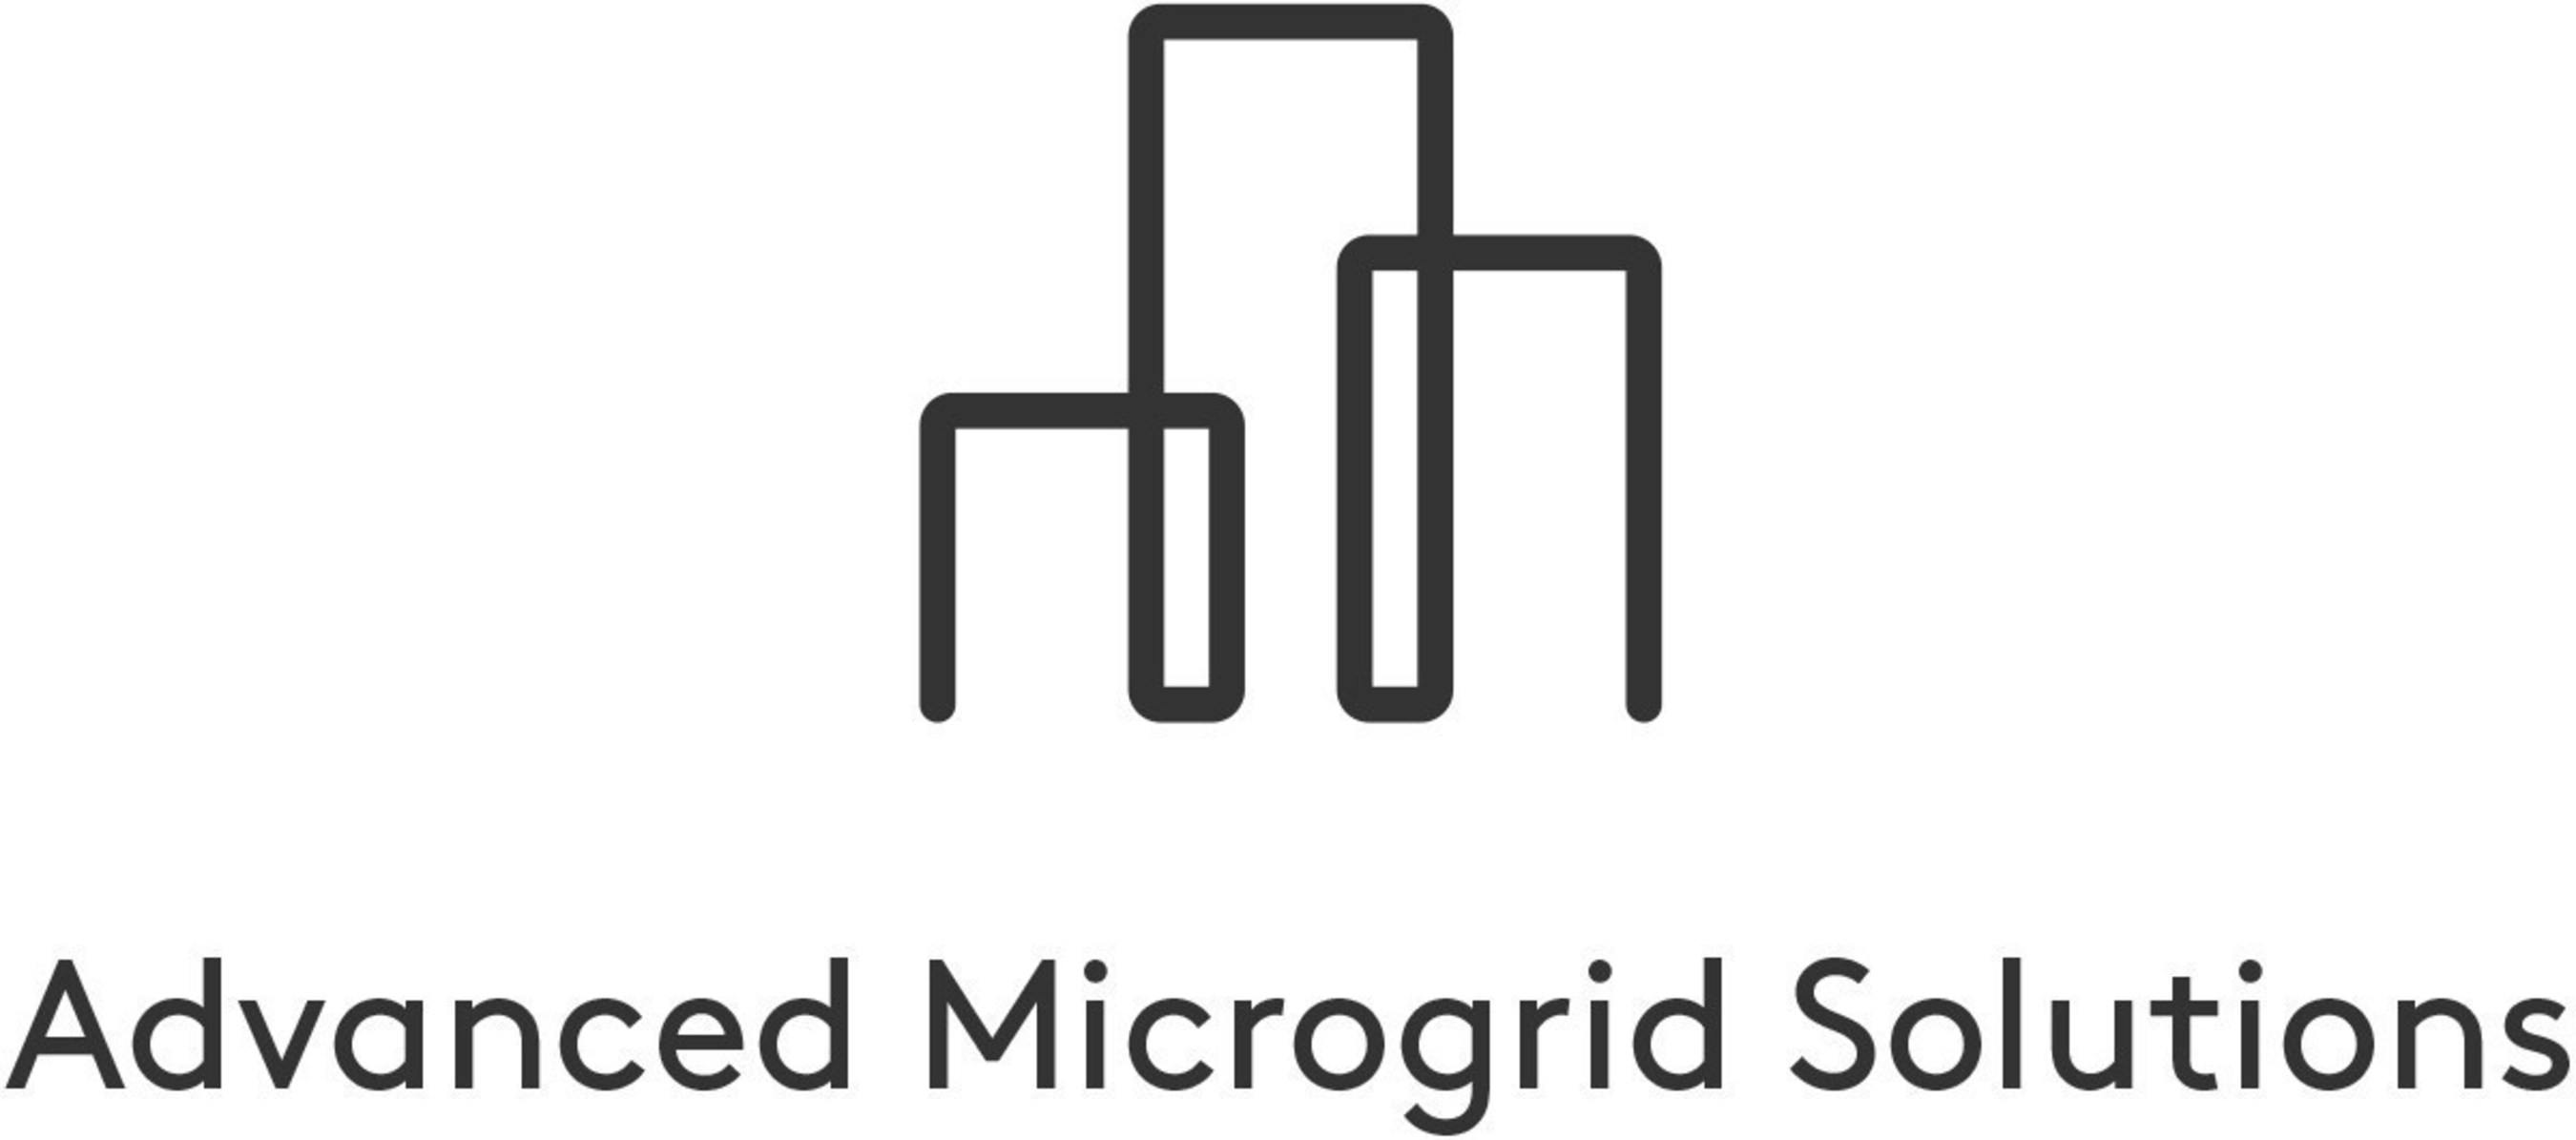 Advanced Microgrid Solutions (AMS) is pioneering the use of energy storage systems for electric utility grid support. (PRNewsFoto/Advanced Microgrid Solutions)